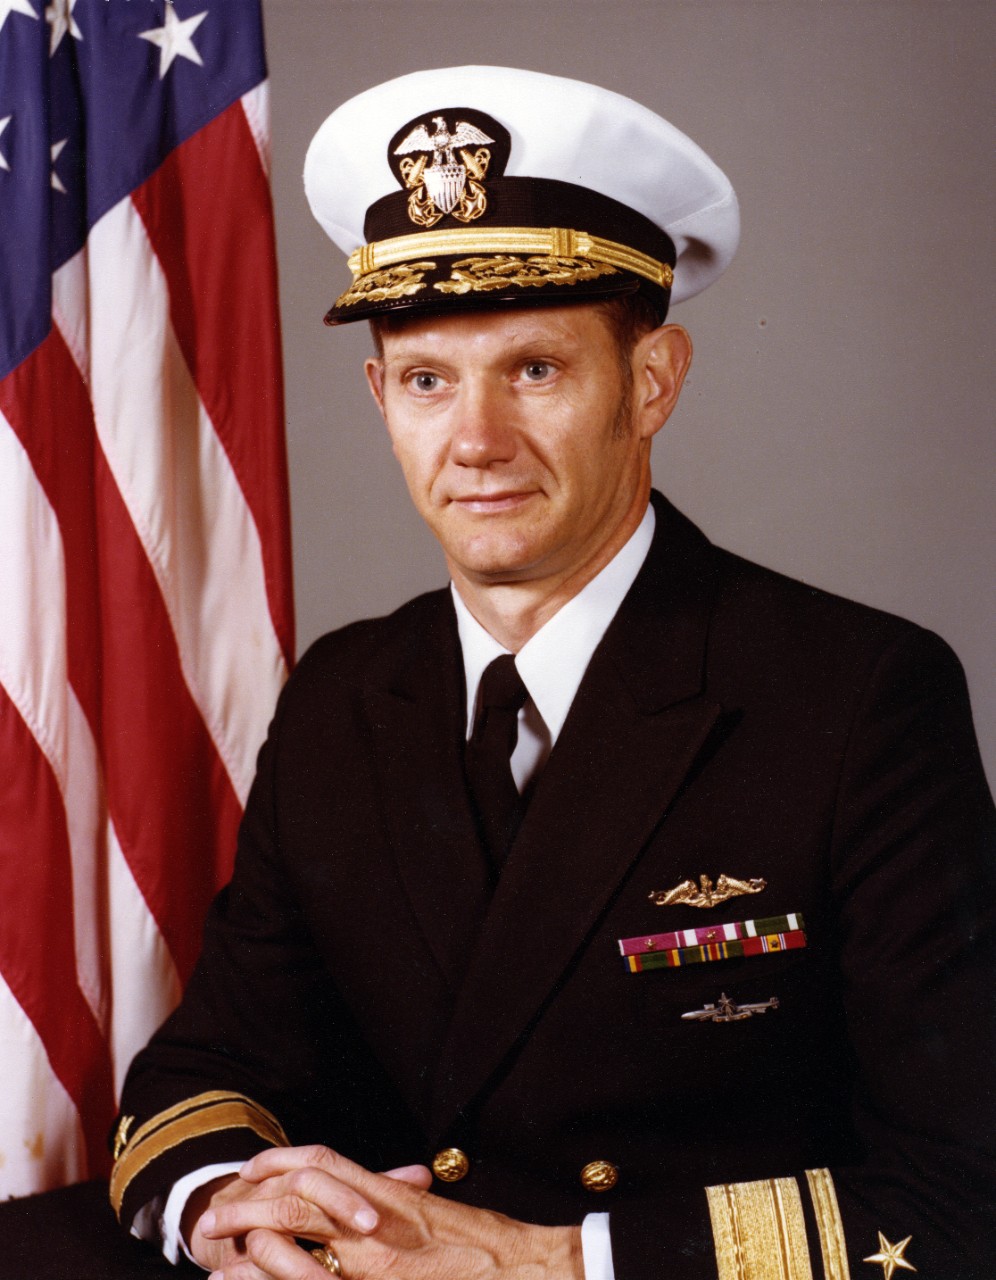 <p>L38-83.05.01 ADM William Dee Smith</p><div style="left: -10000px; top: 0px; width: 9000px; height: 16px; overflow: hidden; position: absolute;"><div>&nbsp;</div></div>